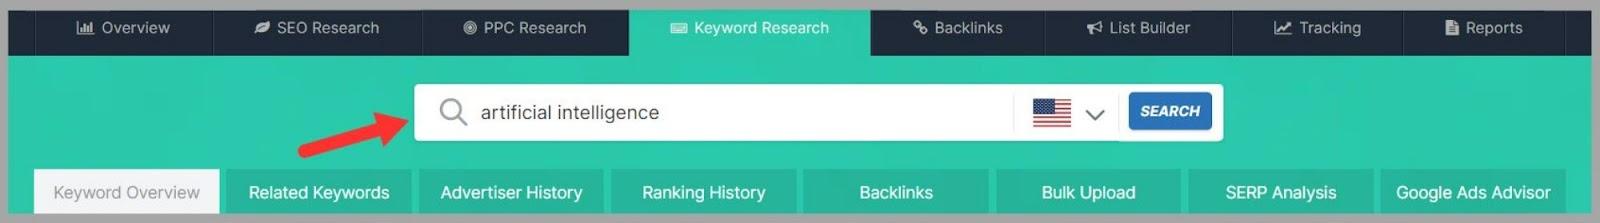 Enter your search term